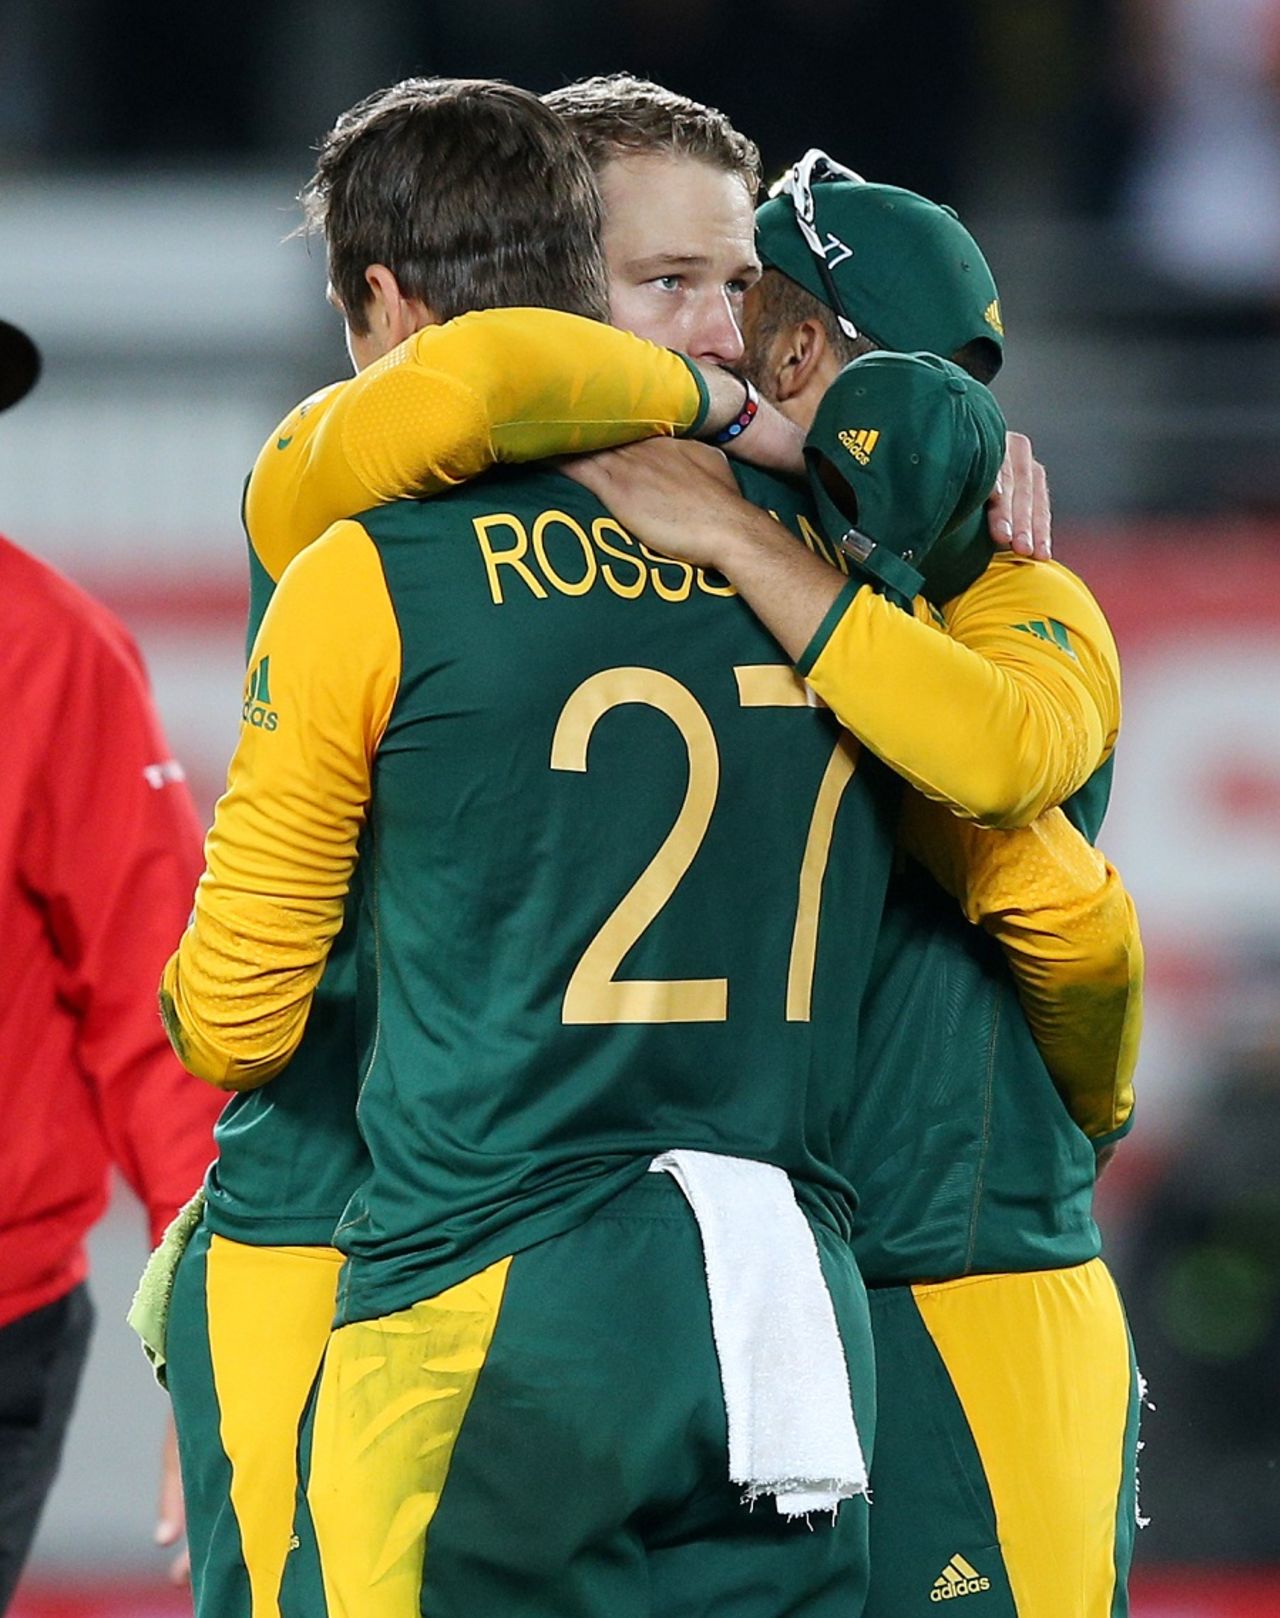 David Miller is embraced by his team-mates after coming up short, New Zealand v South Africa, World Cup 2015, 1st Semi-Final, Auckland, March 24, 2015